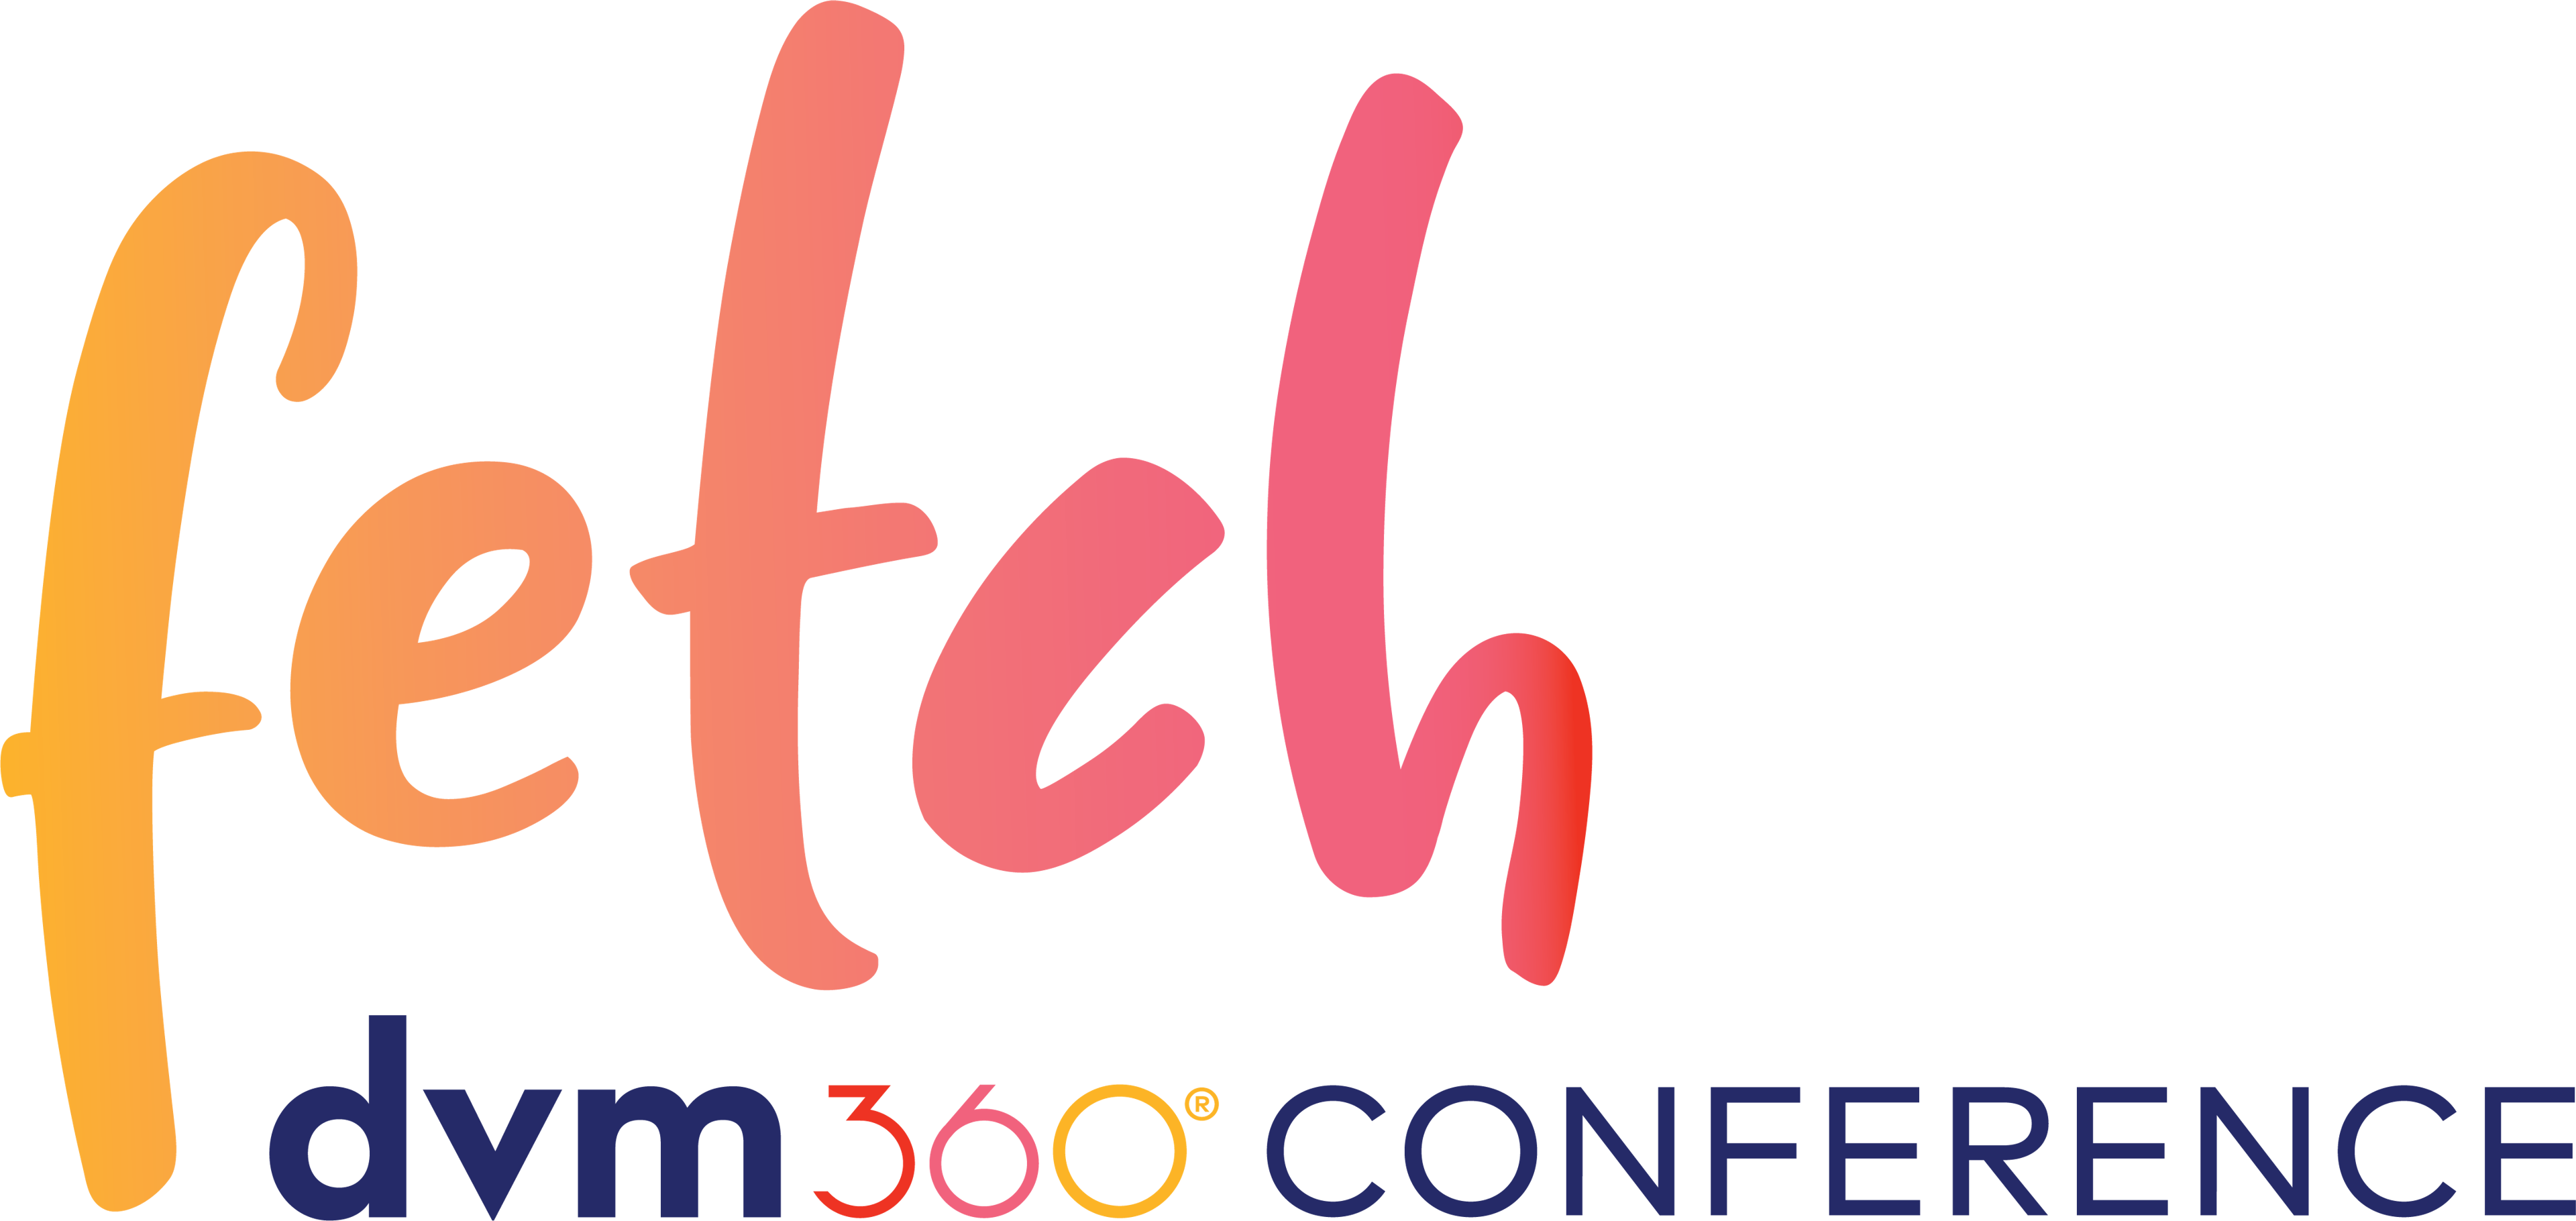 Gamified continuing education launching at Fetch dvm360® Conference in 2022